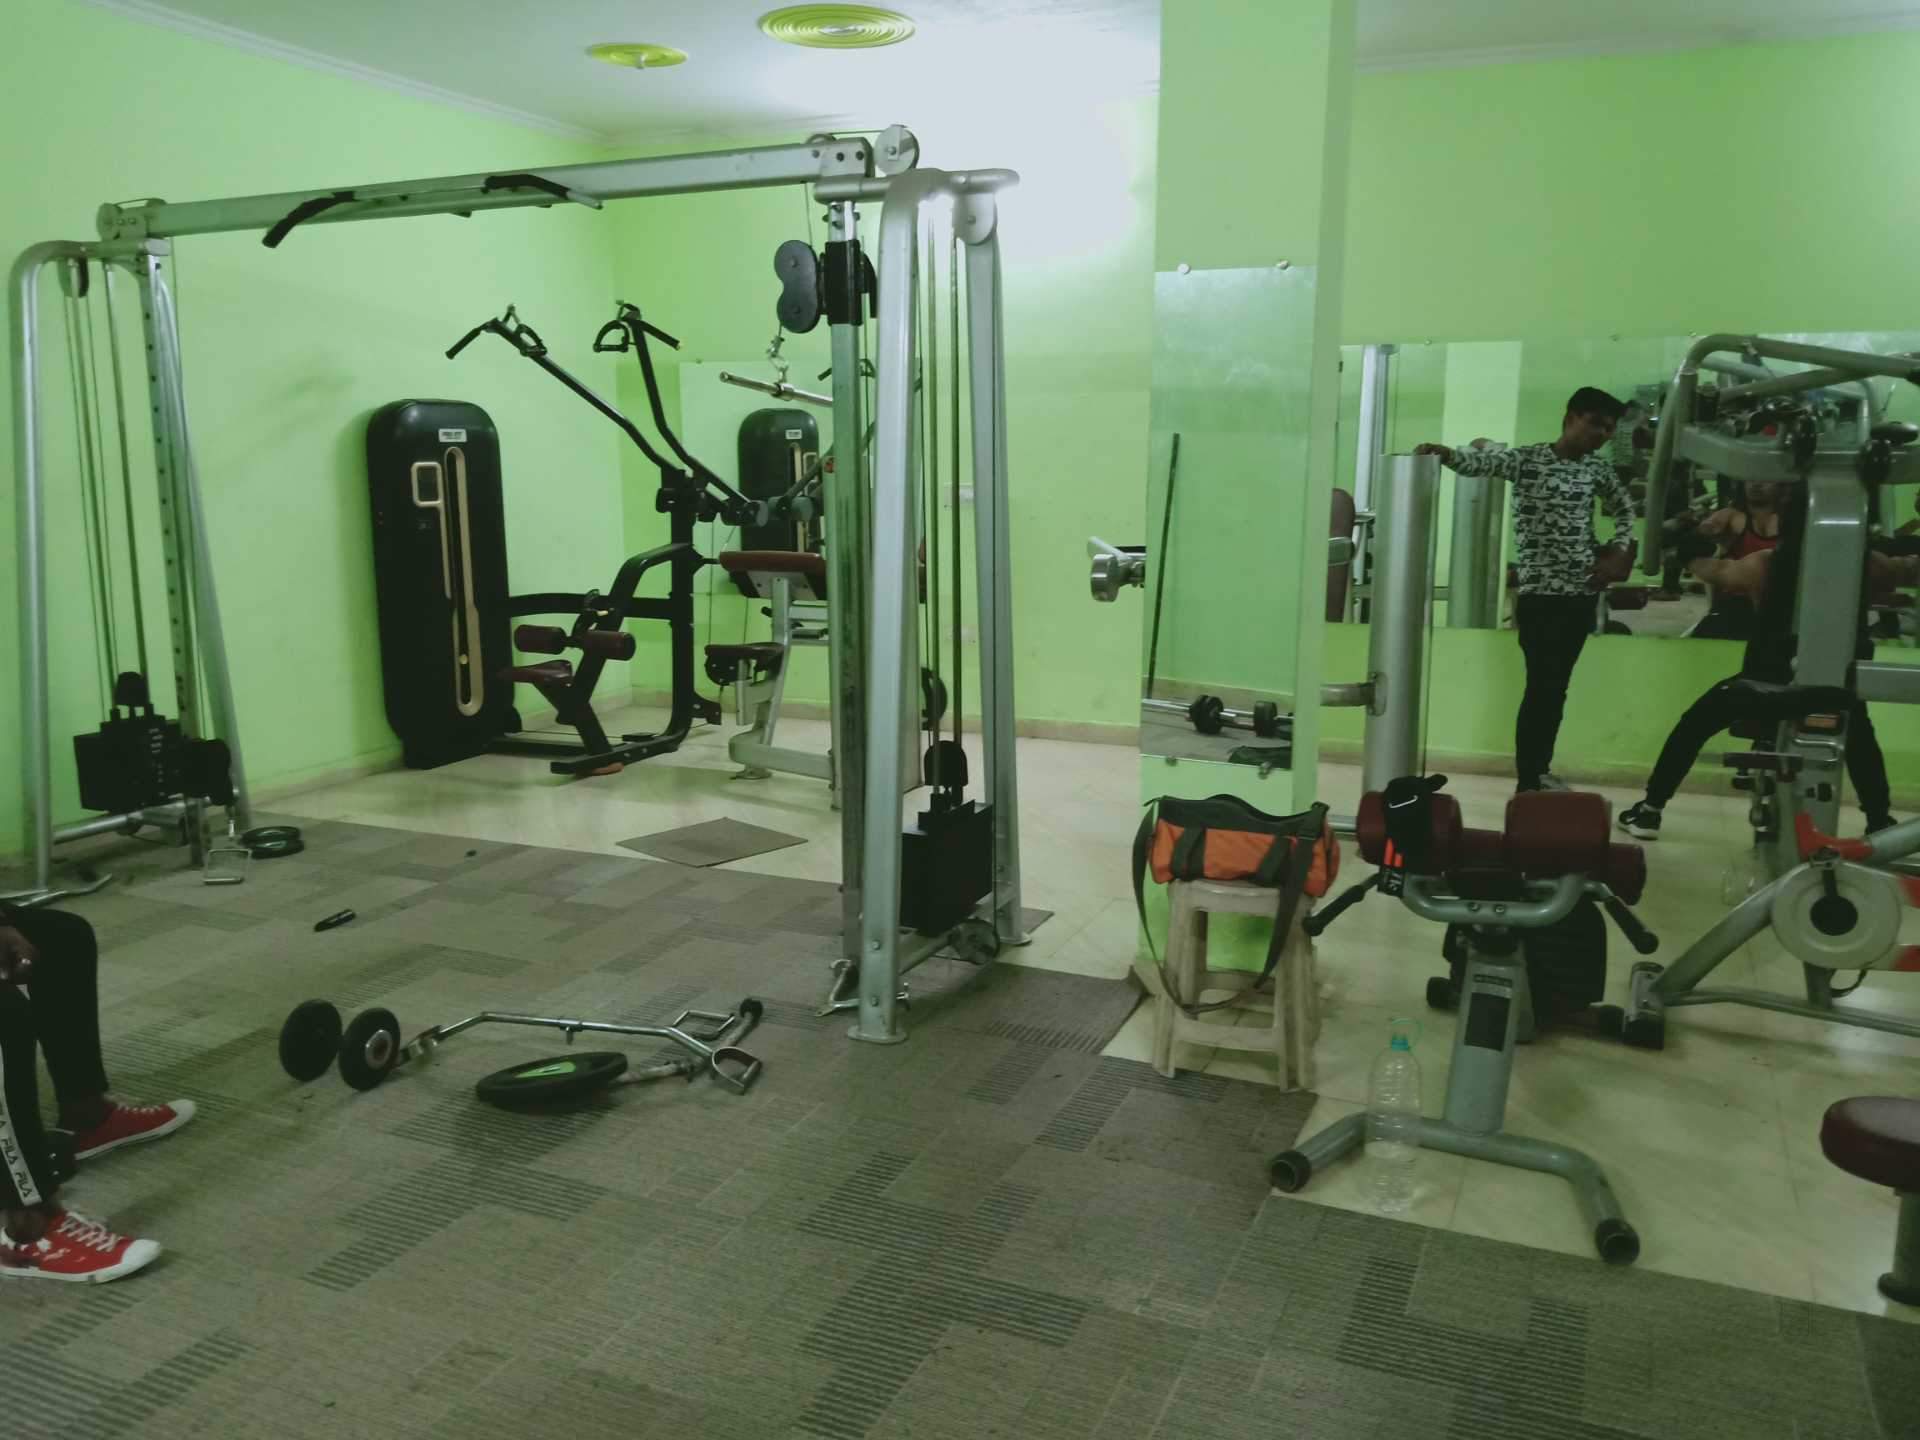 Noida-Sector-45-Your-fitness-factory_902_OTAy_MzEyNg